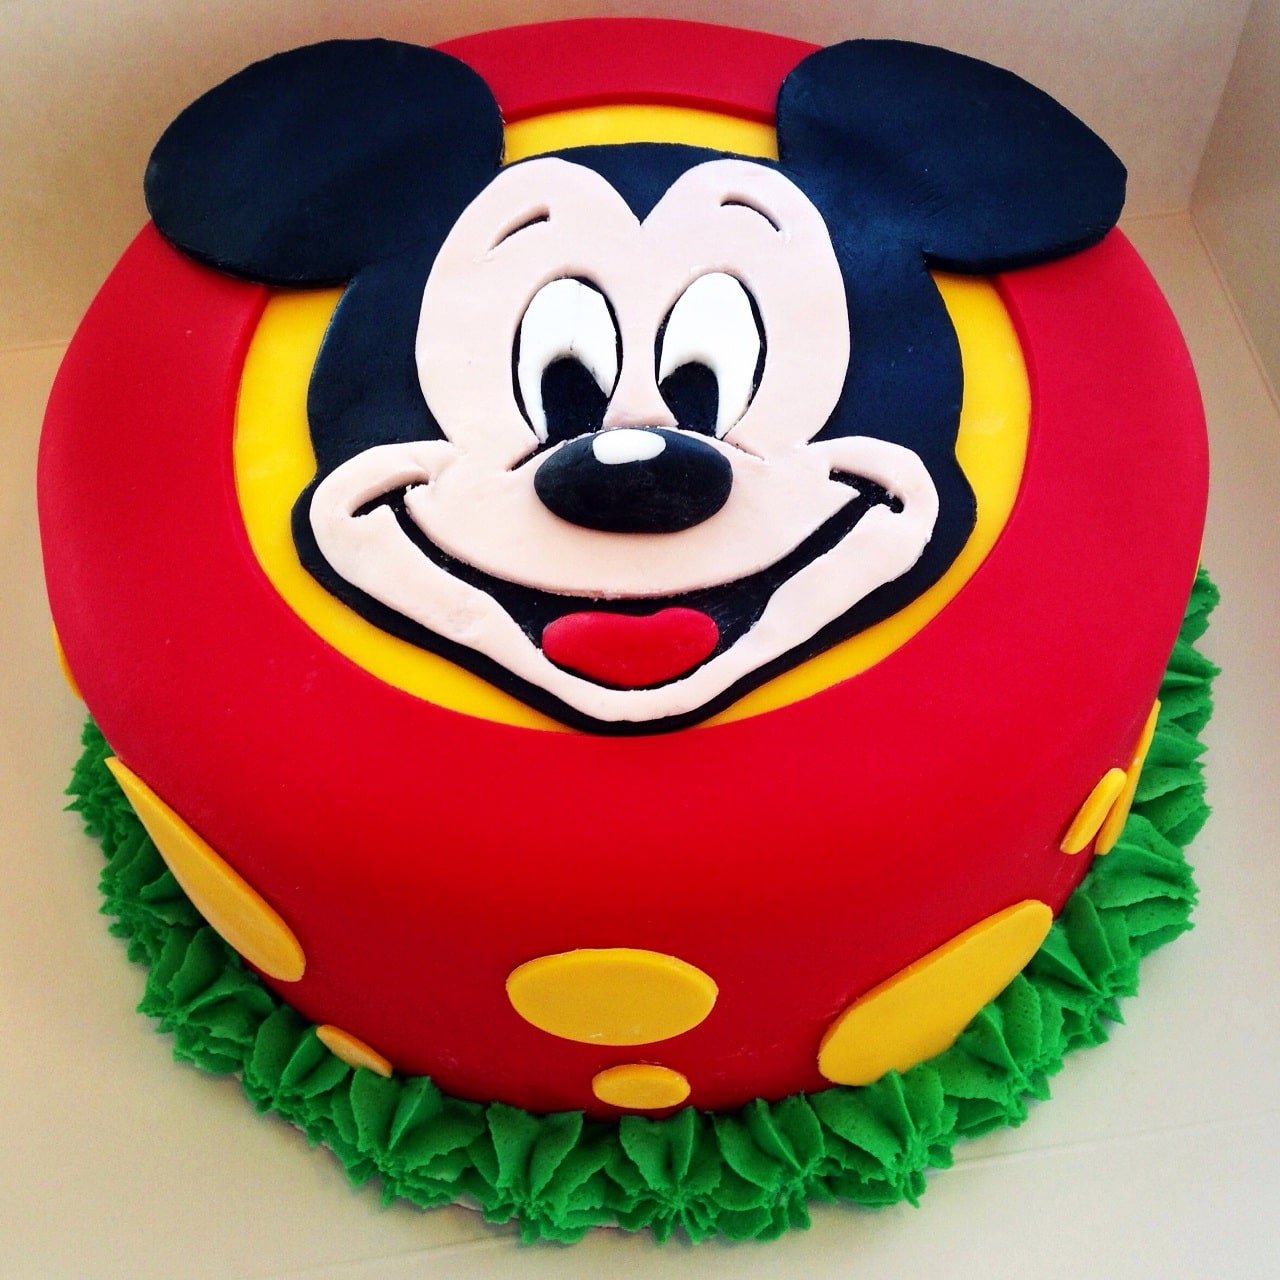 Mickey Mouse Cake Birthday Cake: A Delight for Dessert